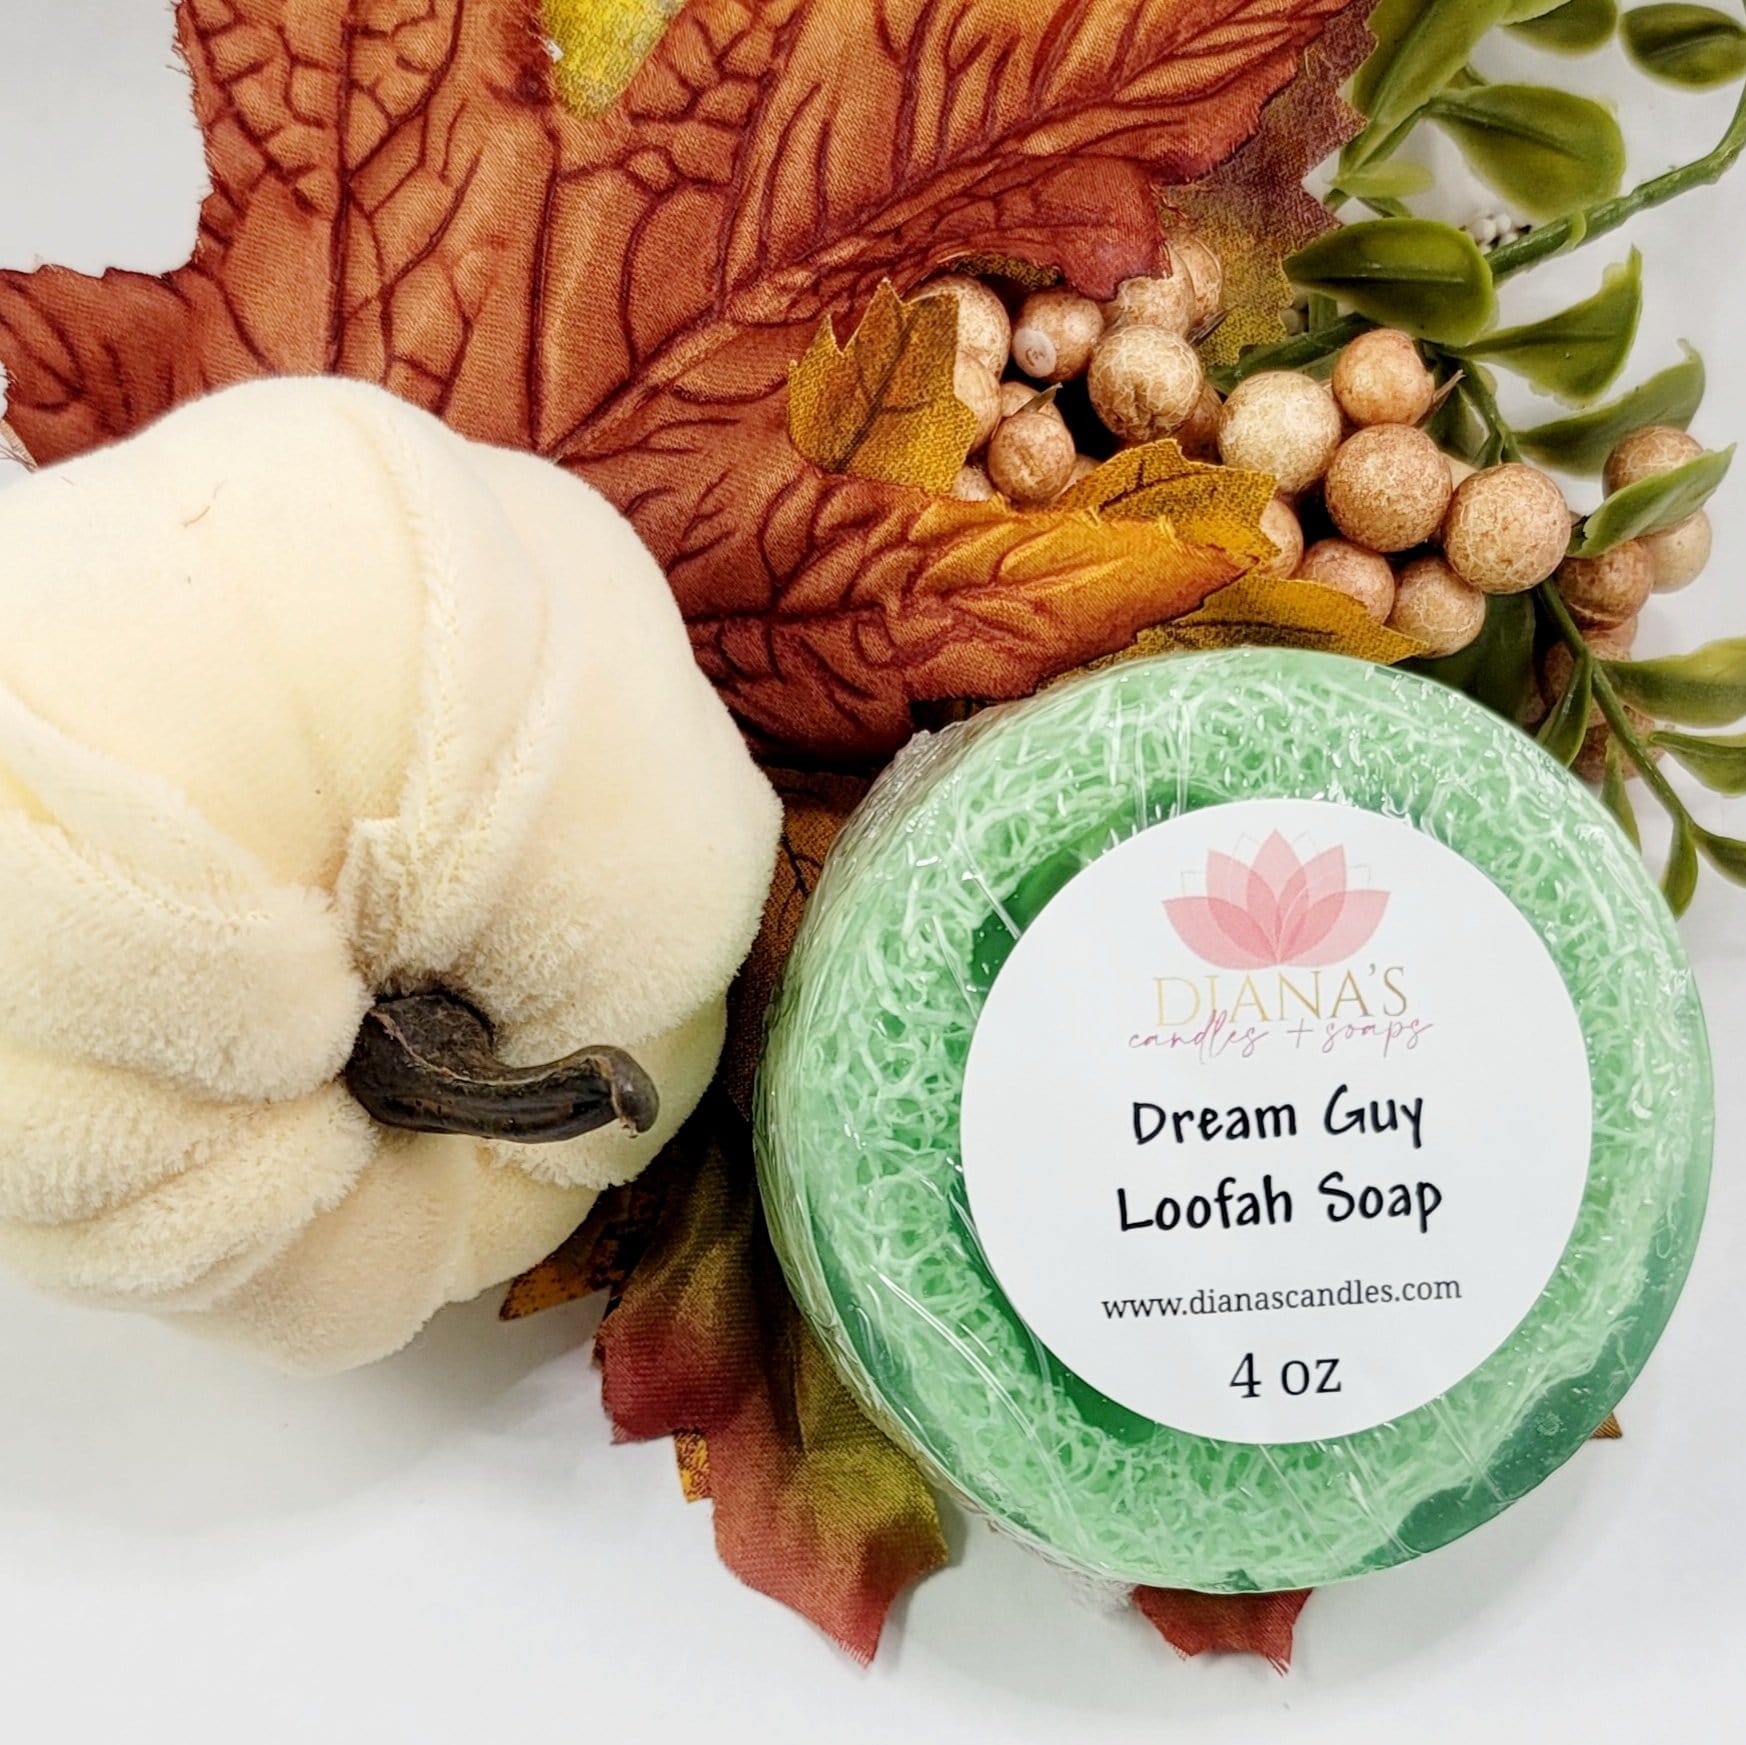 Dream Guy Loofah Soap - Diana's Candles and Soaps 